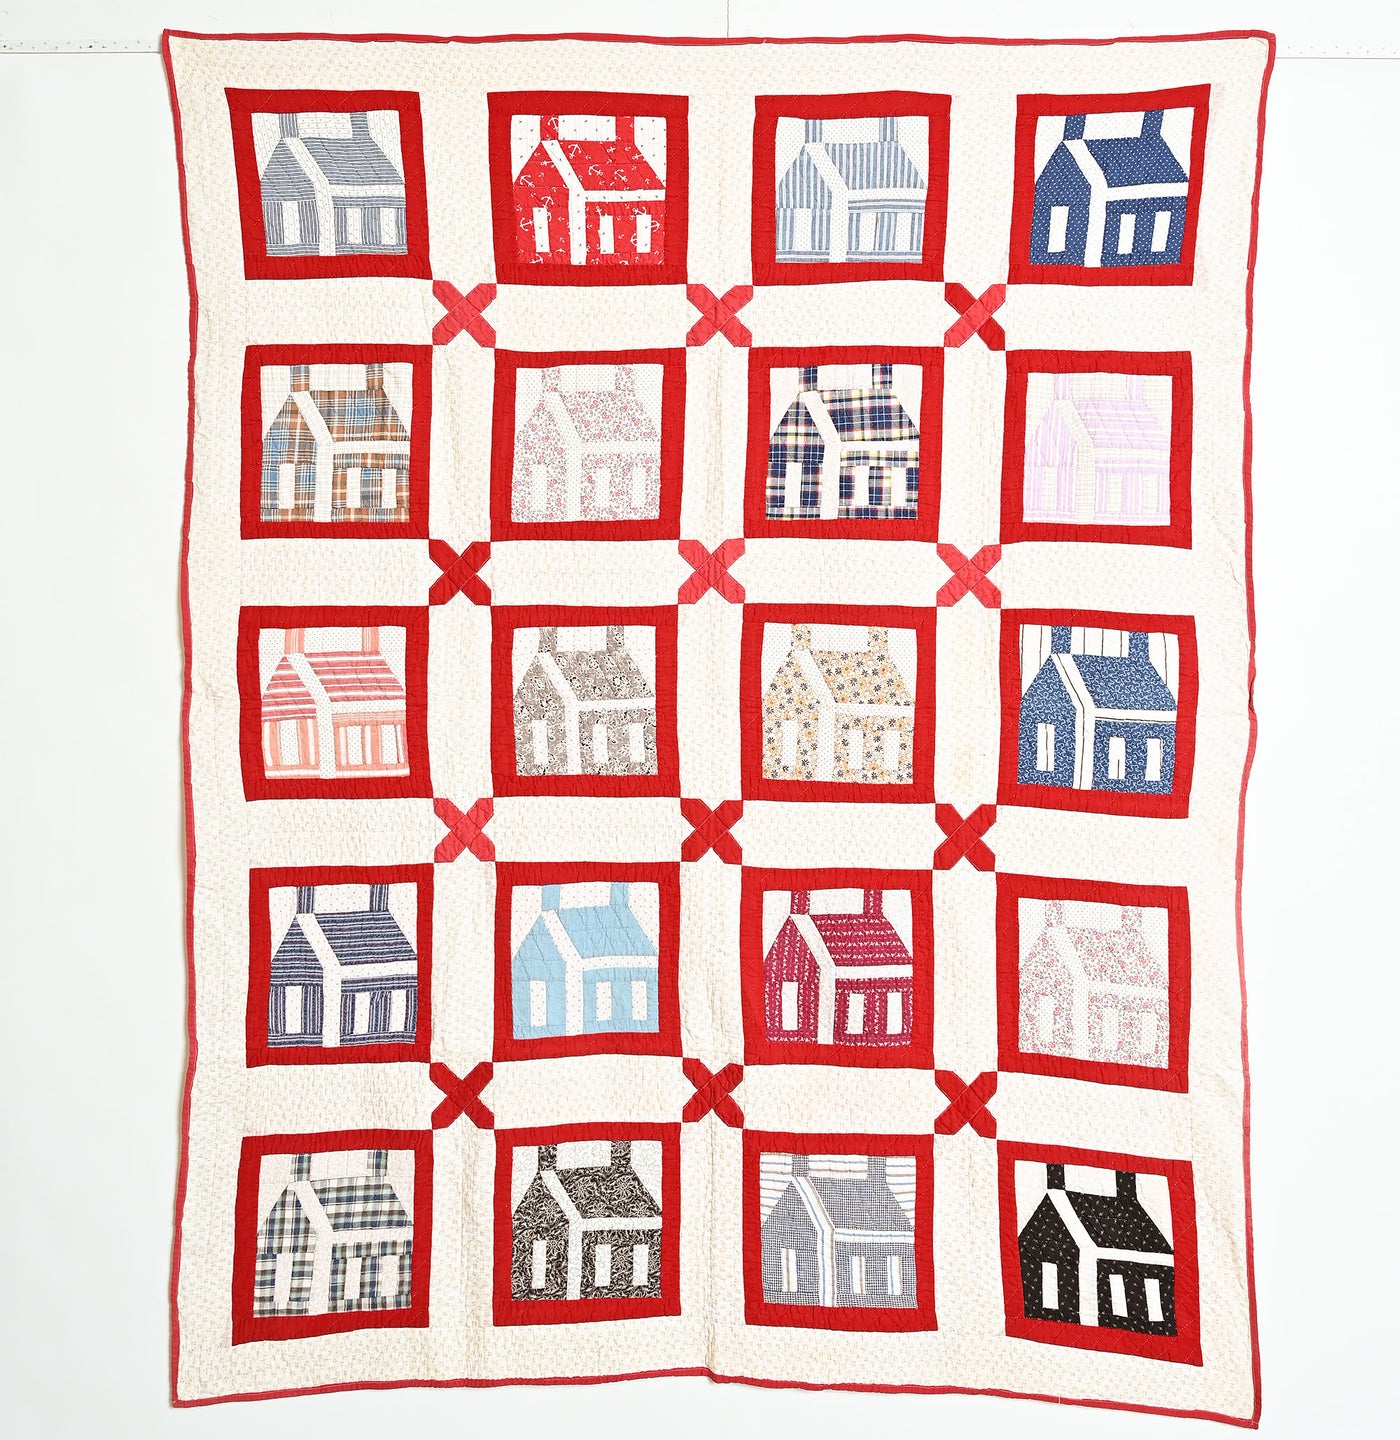 White and red antique quilt with schoolhouse patches in a variety of colors.